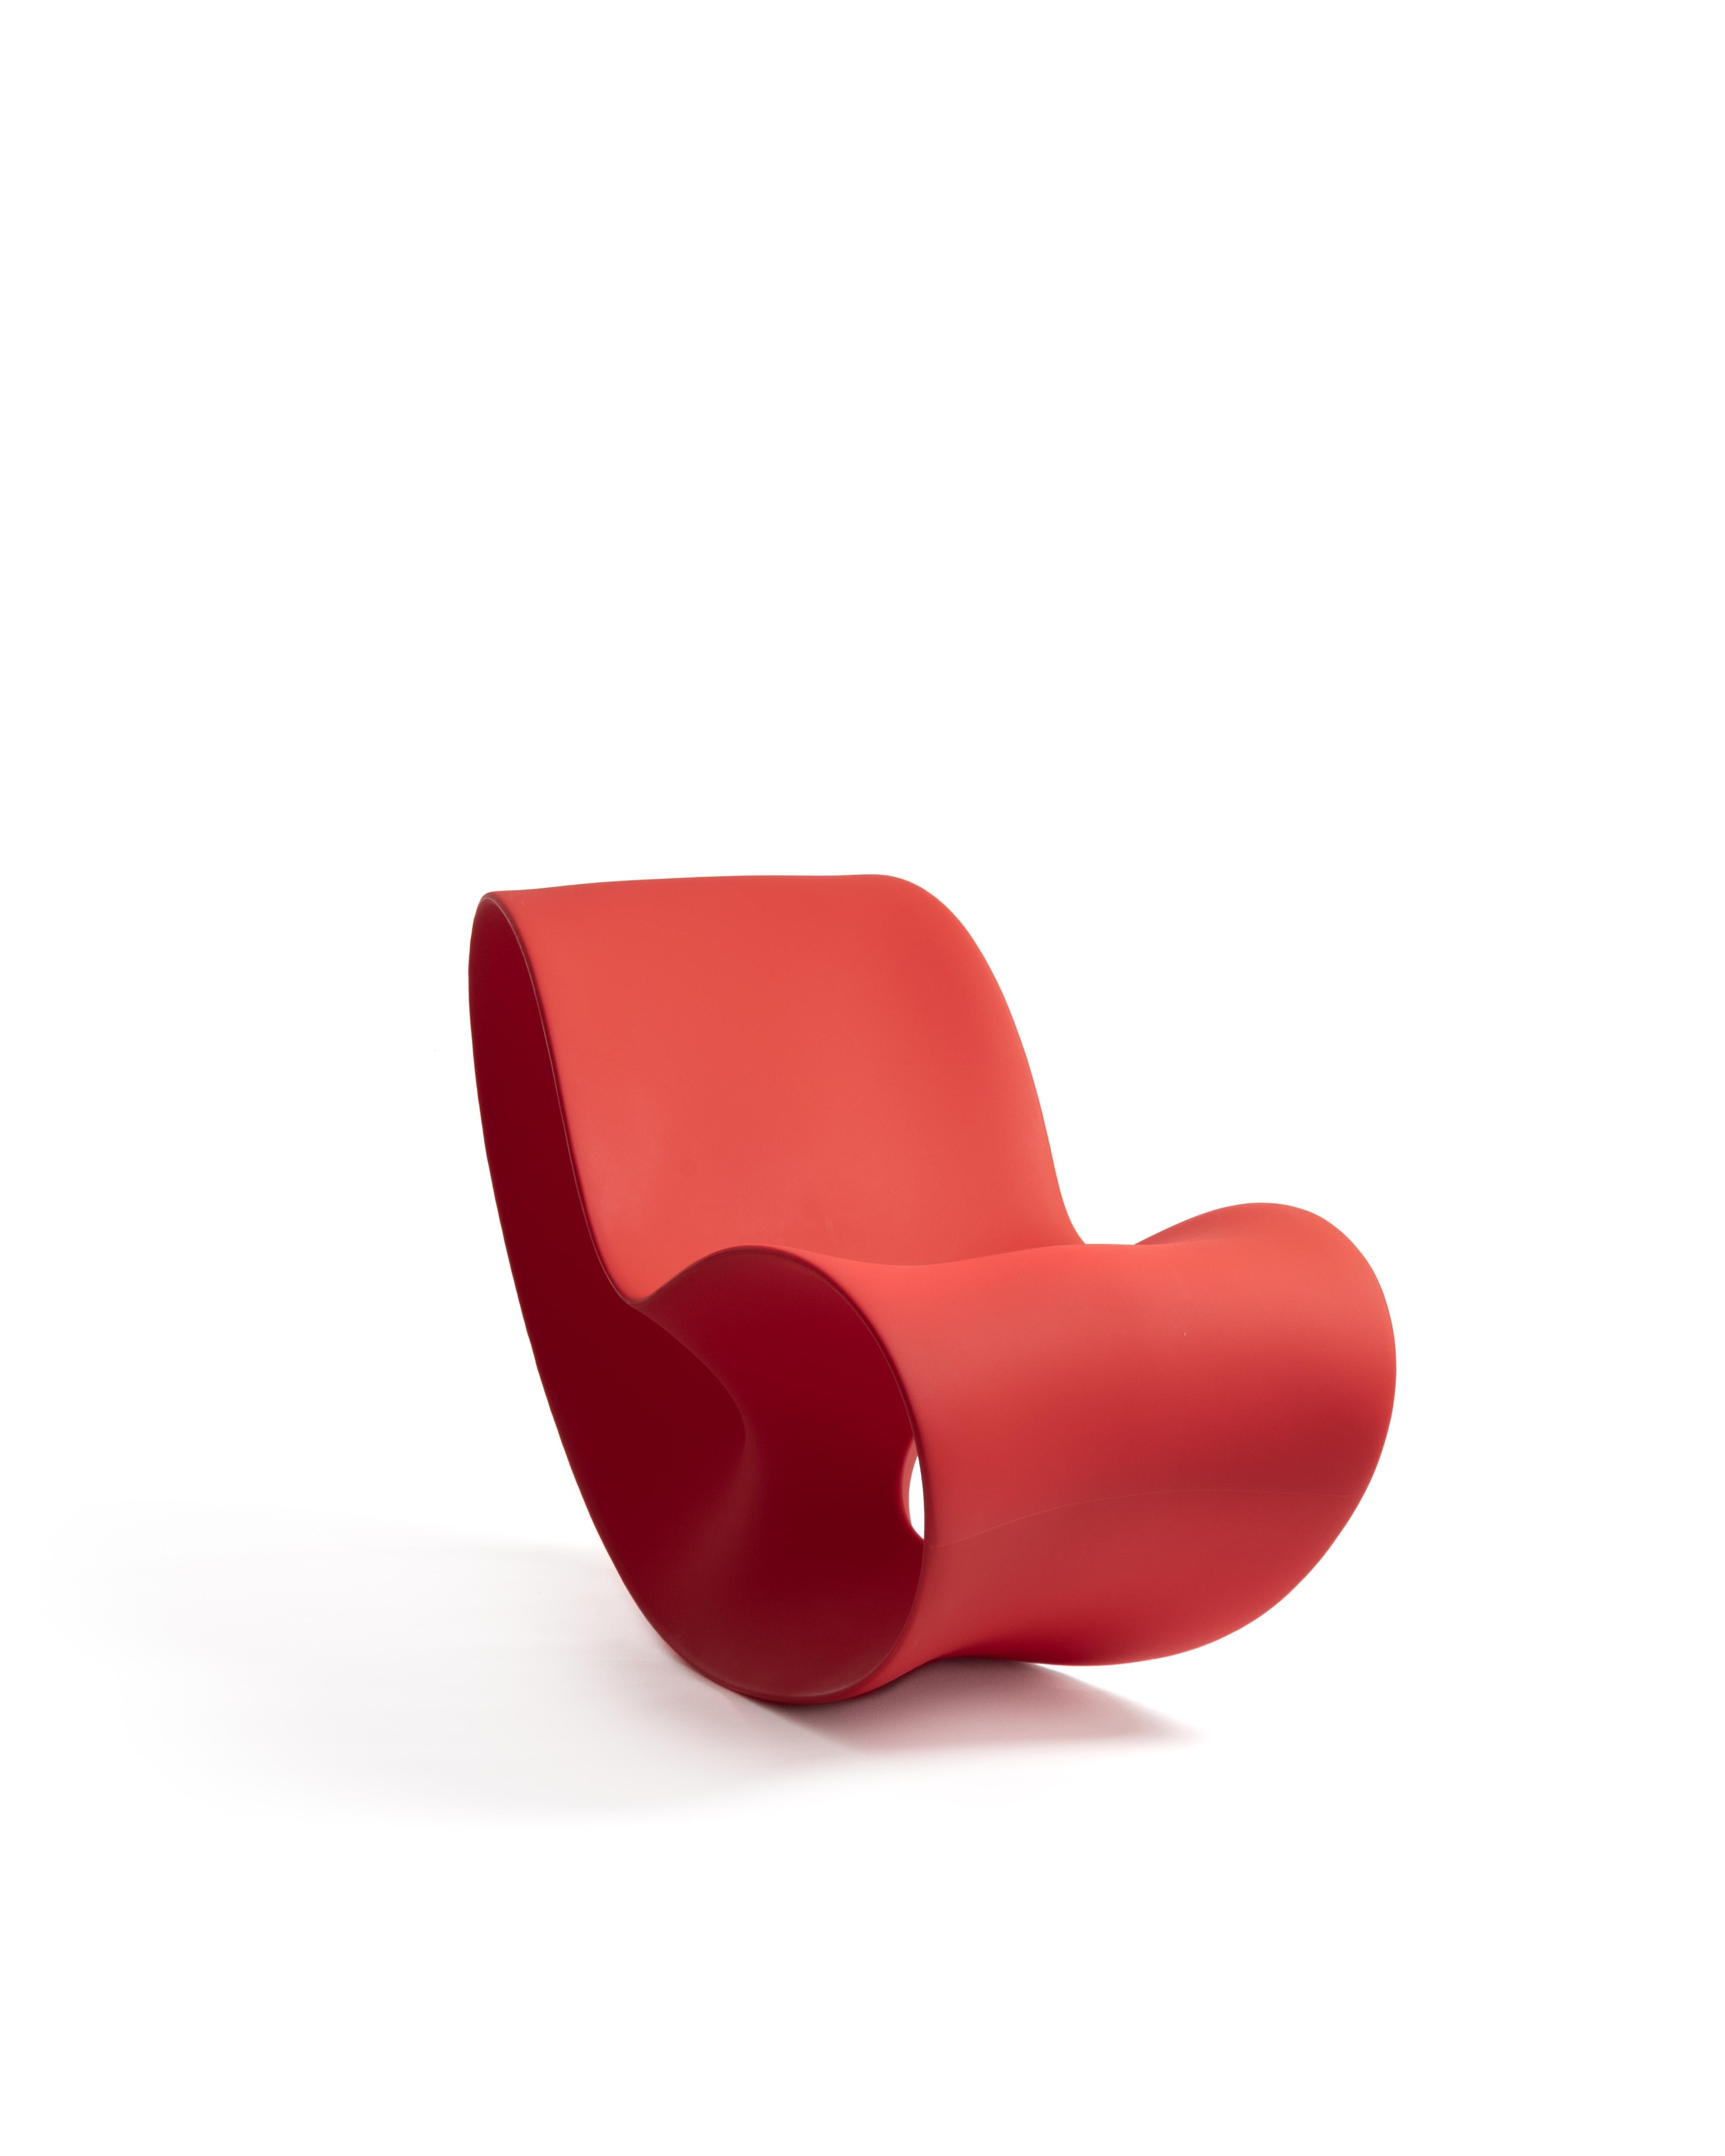 Created by Ron Arad, one of the biggest designers in the international arena, with his masterfully unconventional style, Voido is a rocking chair that looks like a piece of contemporary sculpture, but is made using industrial technology capable of